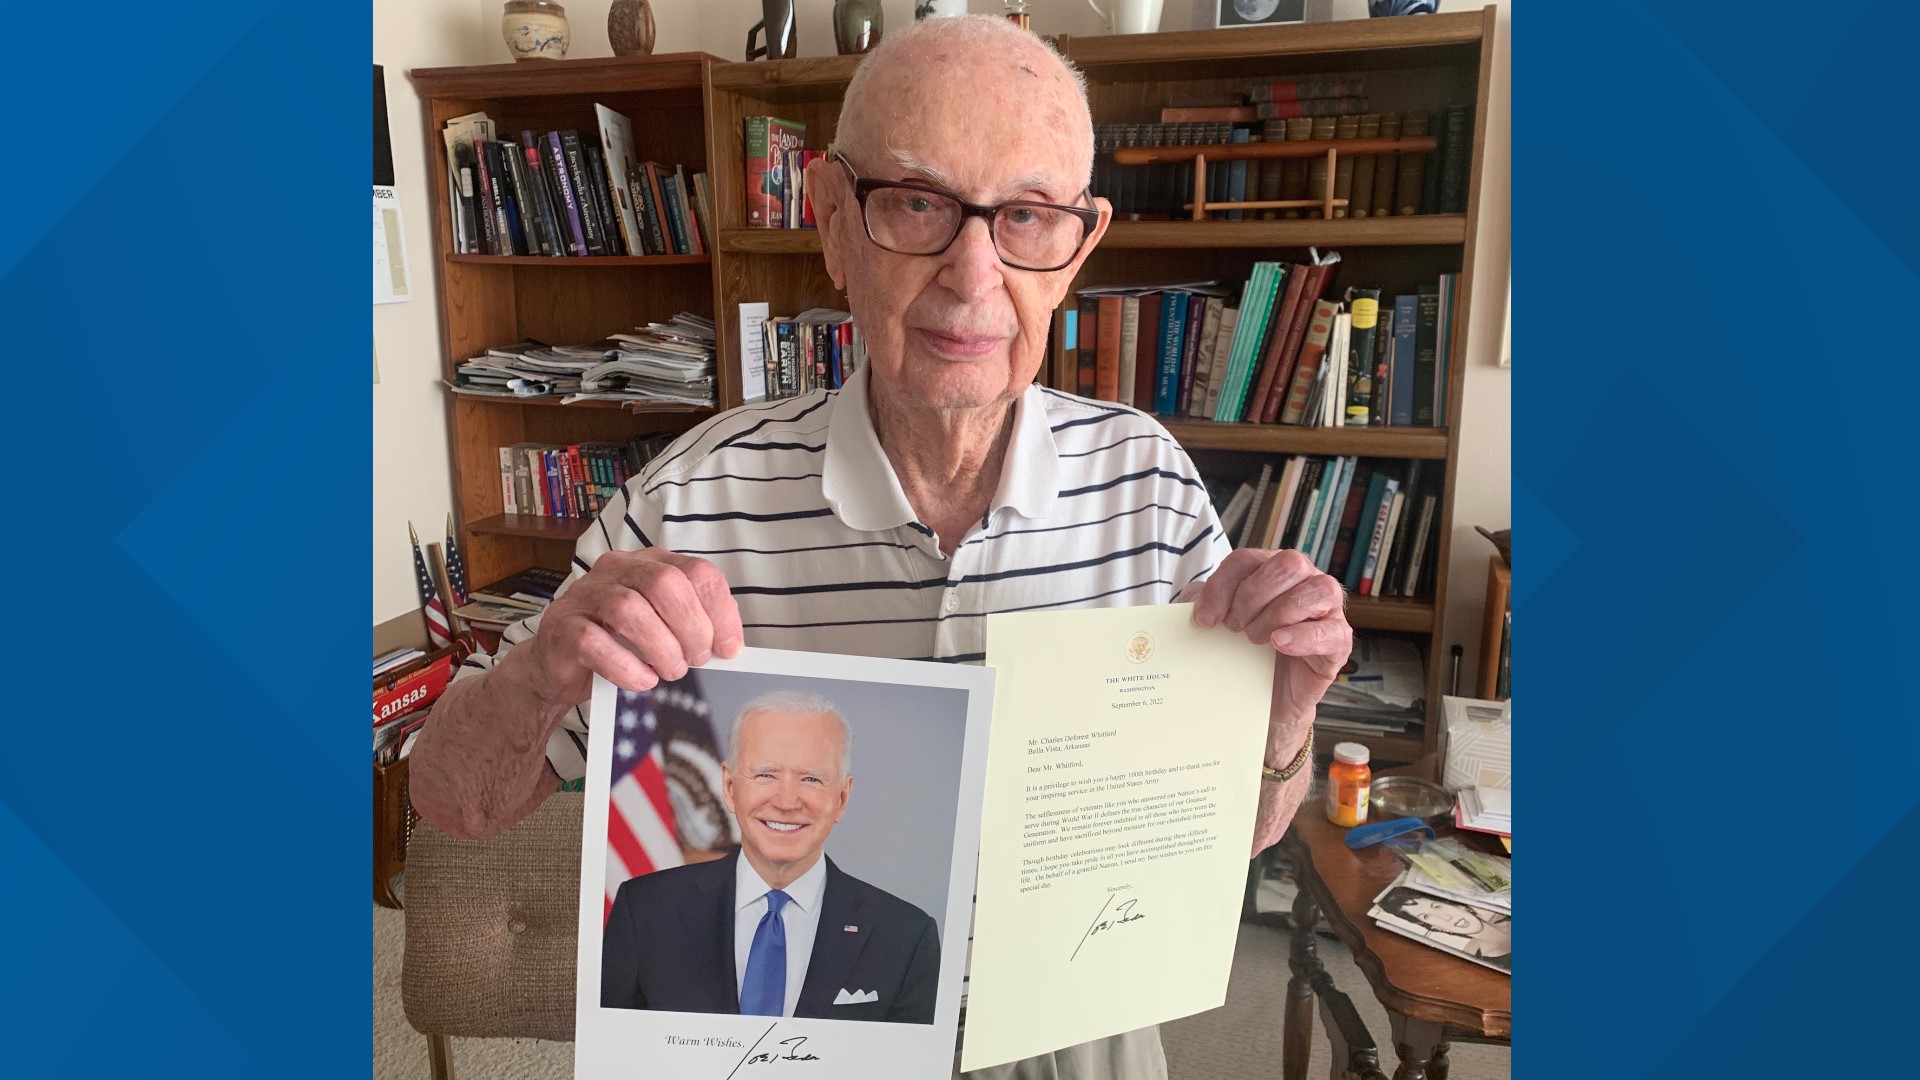 Charles Whitford is a World War II Veteran who served in the Pacific. Today, he received a letter from President Biden wishing him a Happy Birthday.